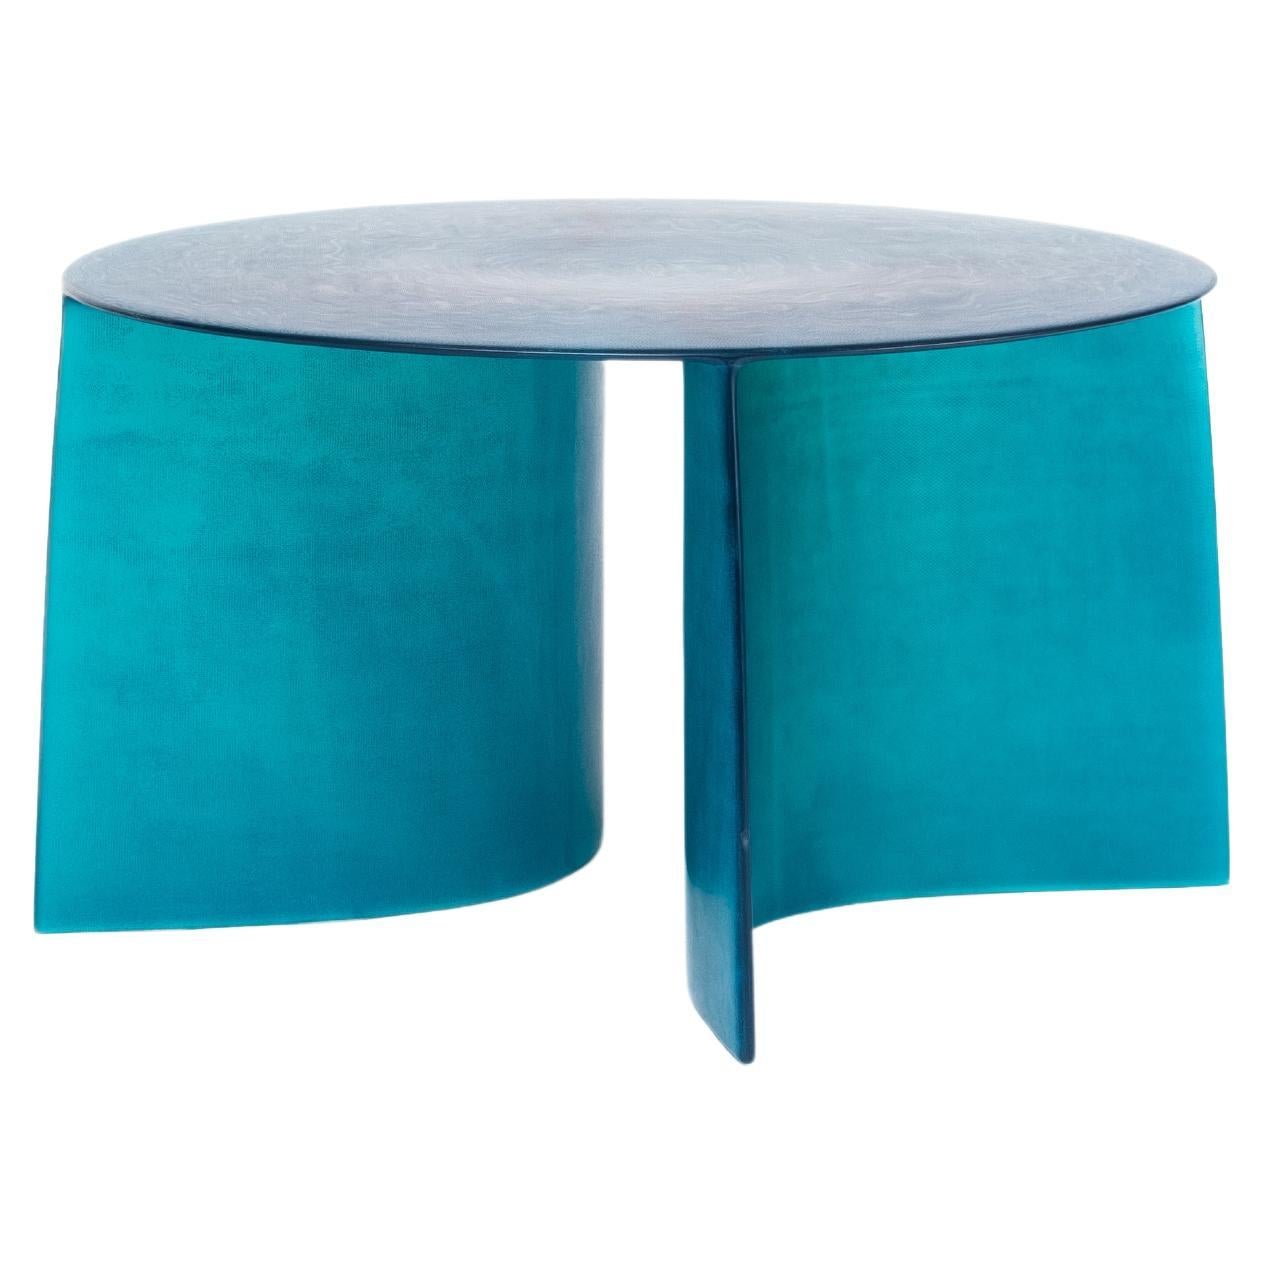 Contemporary Blue Fiberglass, New Wave Dining Table 125 D, by Lukas Cober